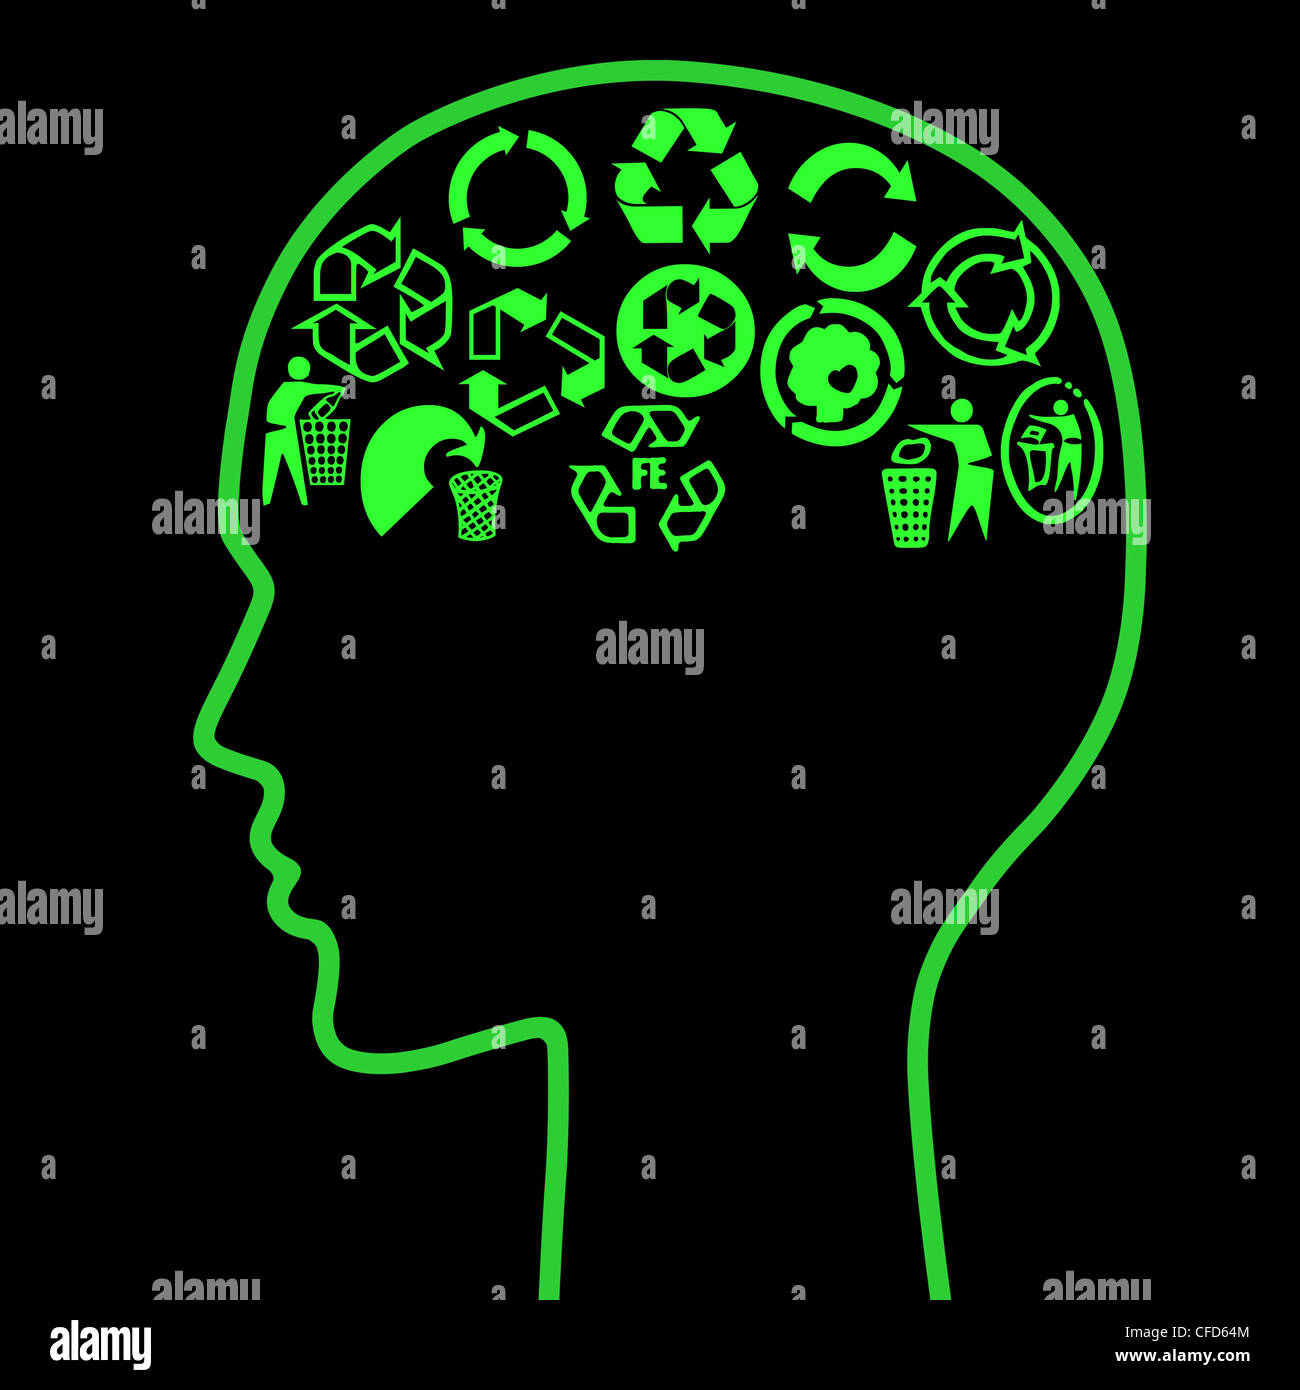 Human head outline with brain as assorted recycle pictograms - recycle awareness concept Stock Photo